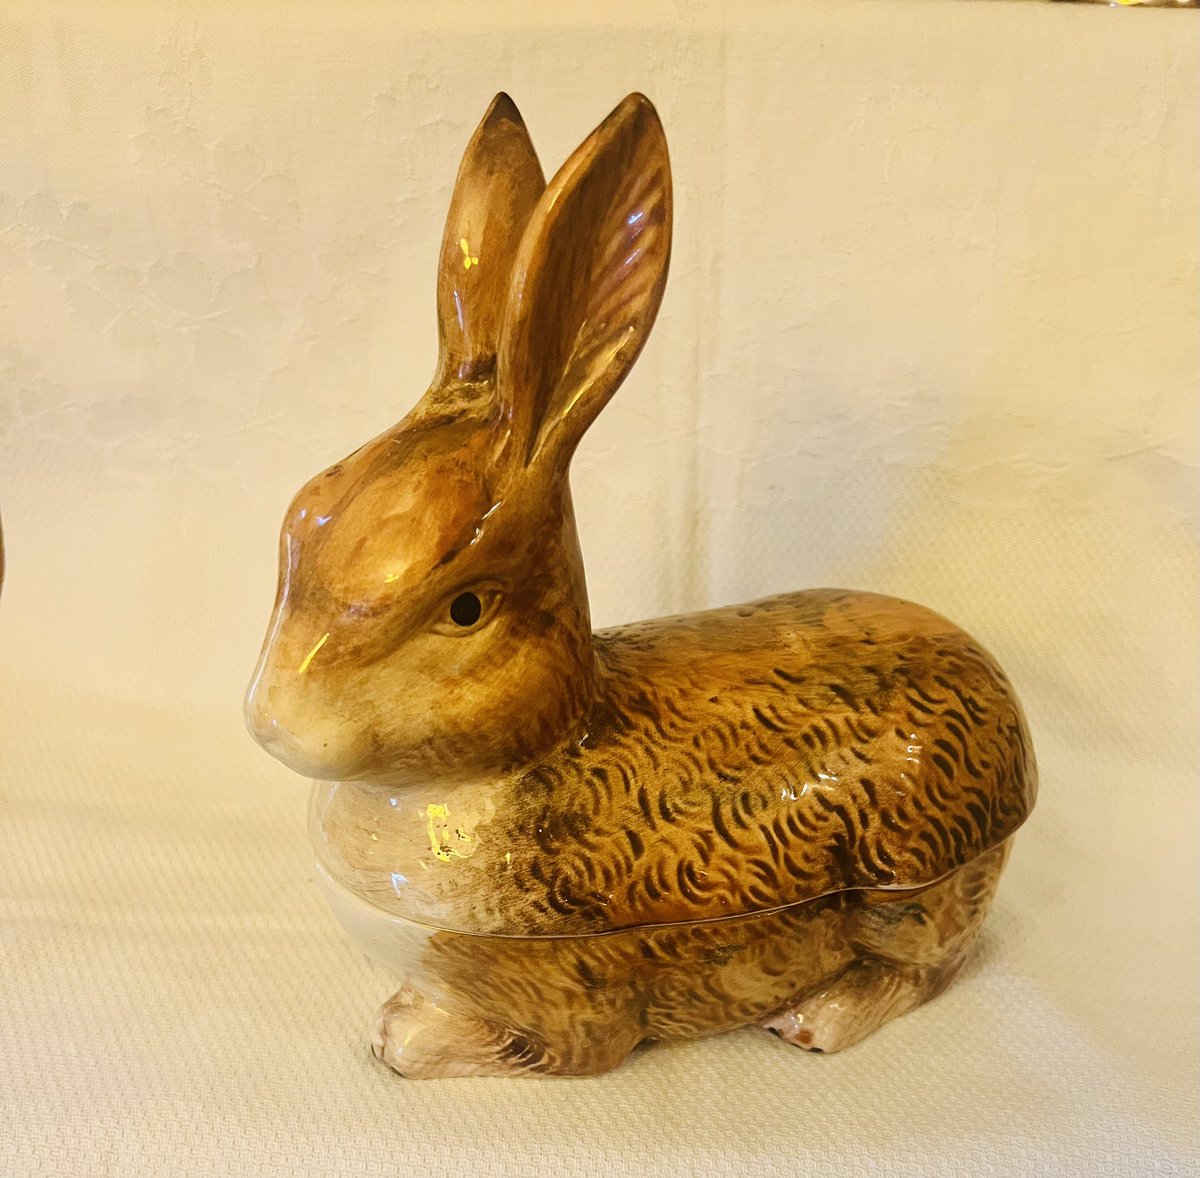 Sticking with the animal theme for  #VintageShowAndSell, and I’ll be sad to see him go! Large #vintage French rabbit paté terrine in faience sarahhuntantiques.etsy.com/listing/161458… #ChristmasGiftIdea #rabbits #buyvintage #shopindie #shopvintage #etsyfinds #etsyfavorites